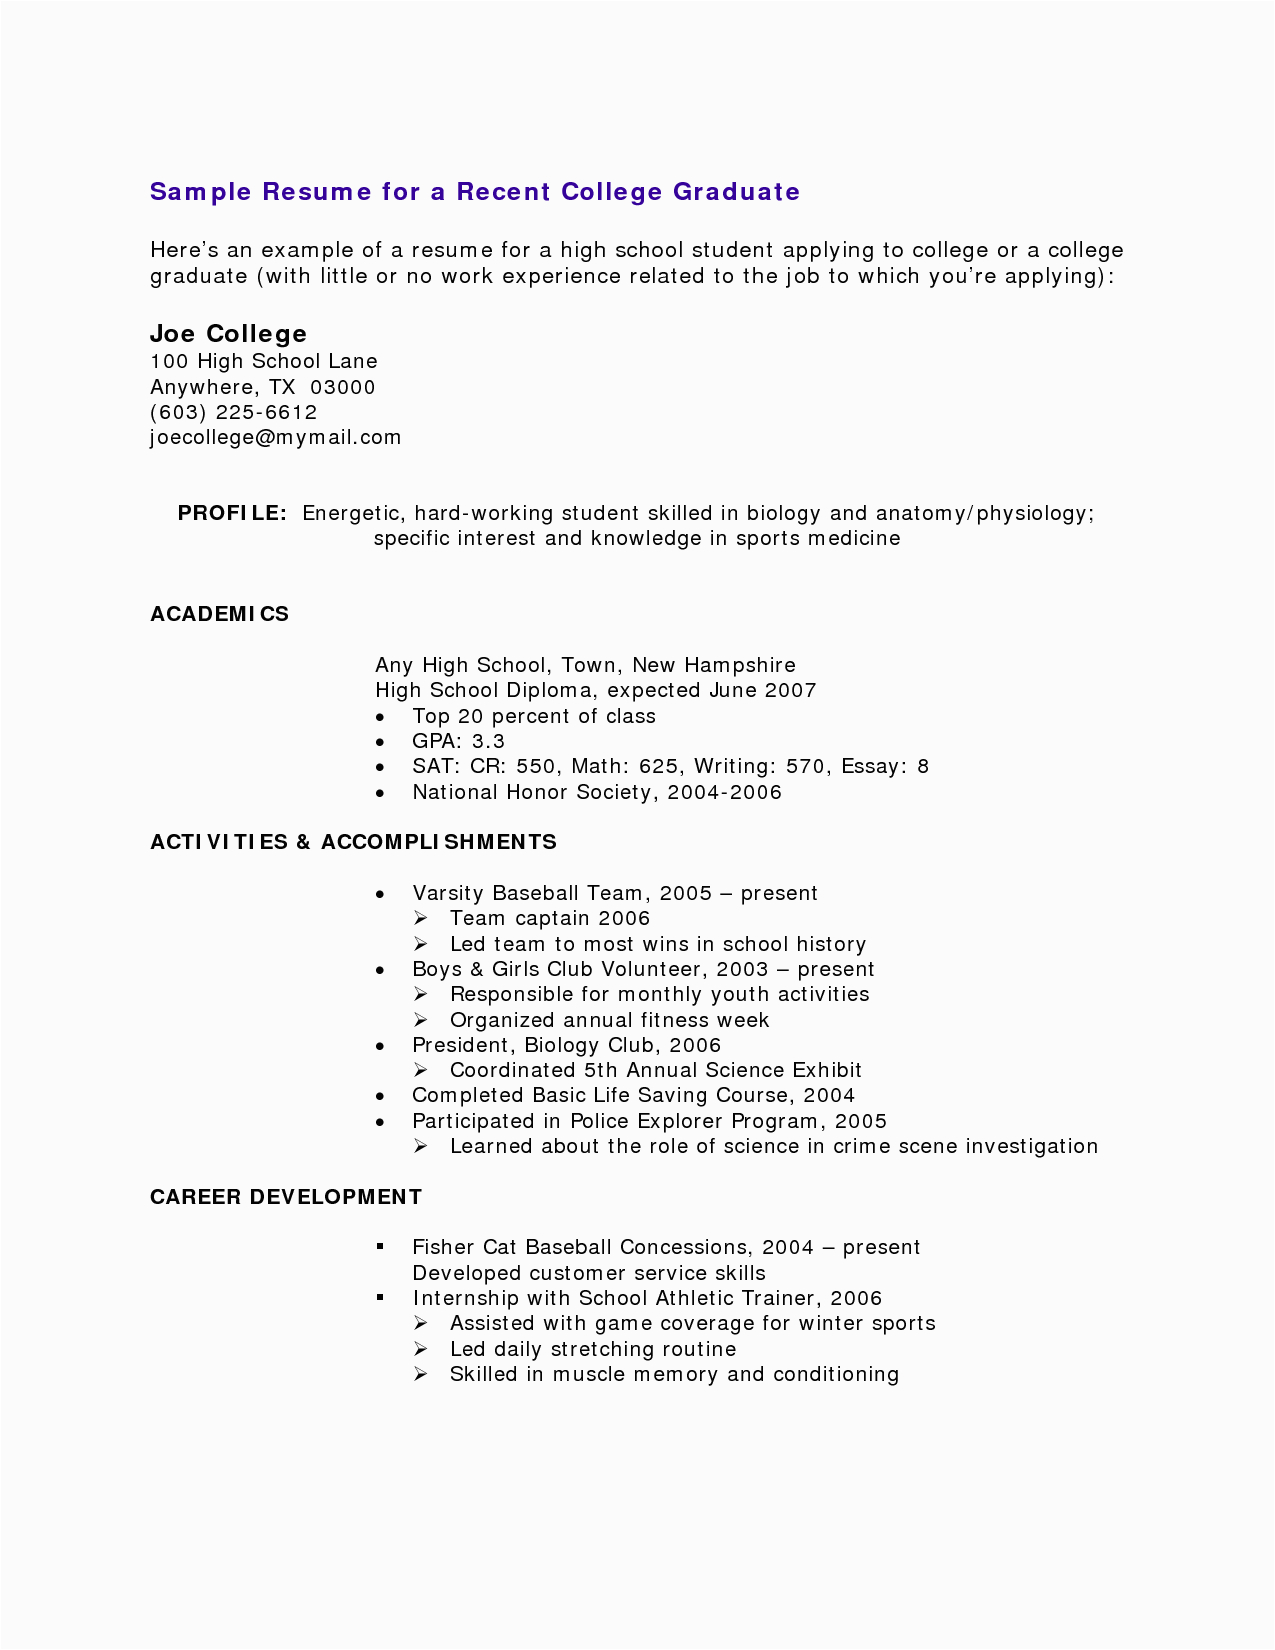 Sample Resume with Little Job Experience Resume Examples with Little Job Experience First Resume